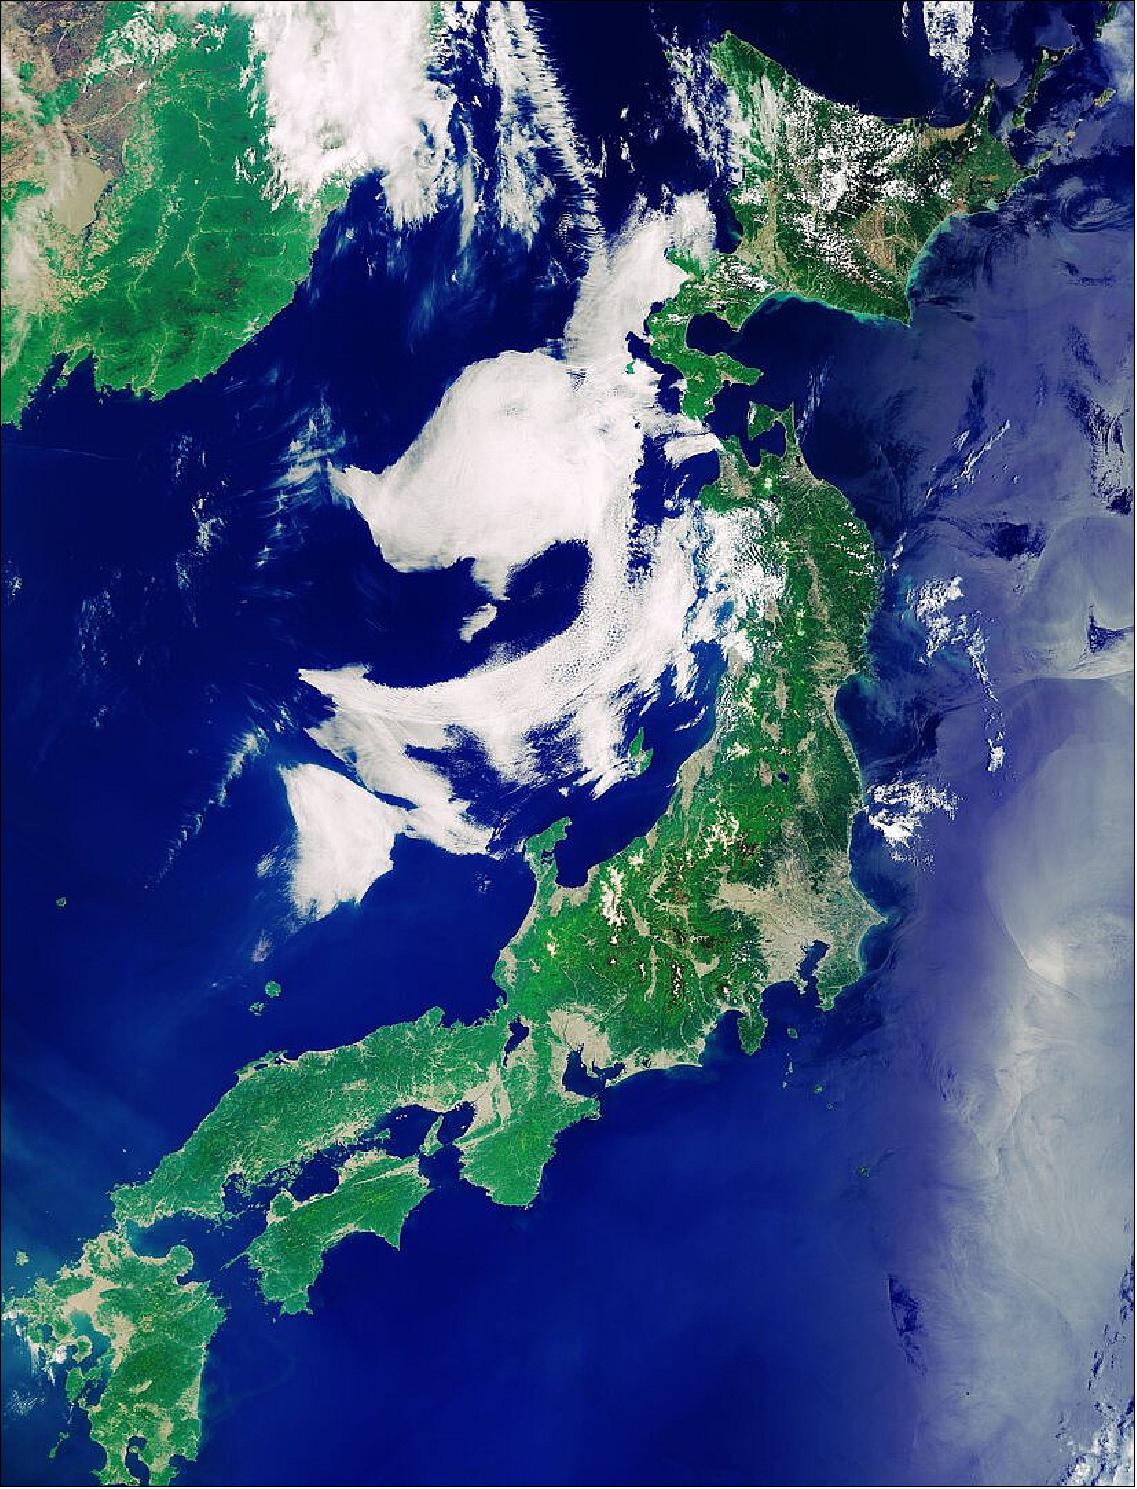 Figure 56: While the archipelago is made up of over 6000 islands, this image focuses on Japan's four main islands. Running from north to south, Hokkaido is visible in the top right corner, Honshu is the long island stretching in a northeast–southwest arc, Shikoku can be seen just beneath the lower part of Honshu, and Kyushu is at the bottom. This image, which was captured on 24 May 2019, is also featured on the Earth from Space video program (image credit: ESA, the image contains modified Copernicus Sentinel data (2019), processed by ESA, CC BY-SA 3.0 IGO)